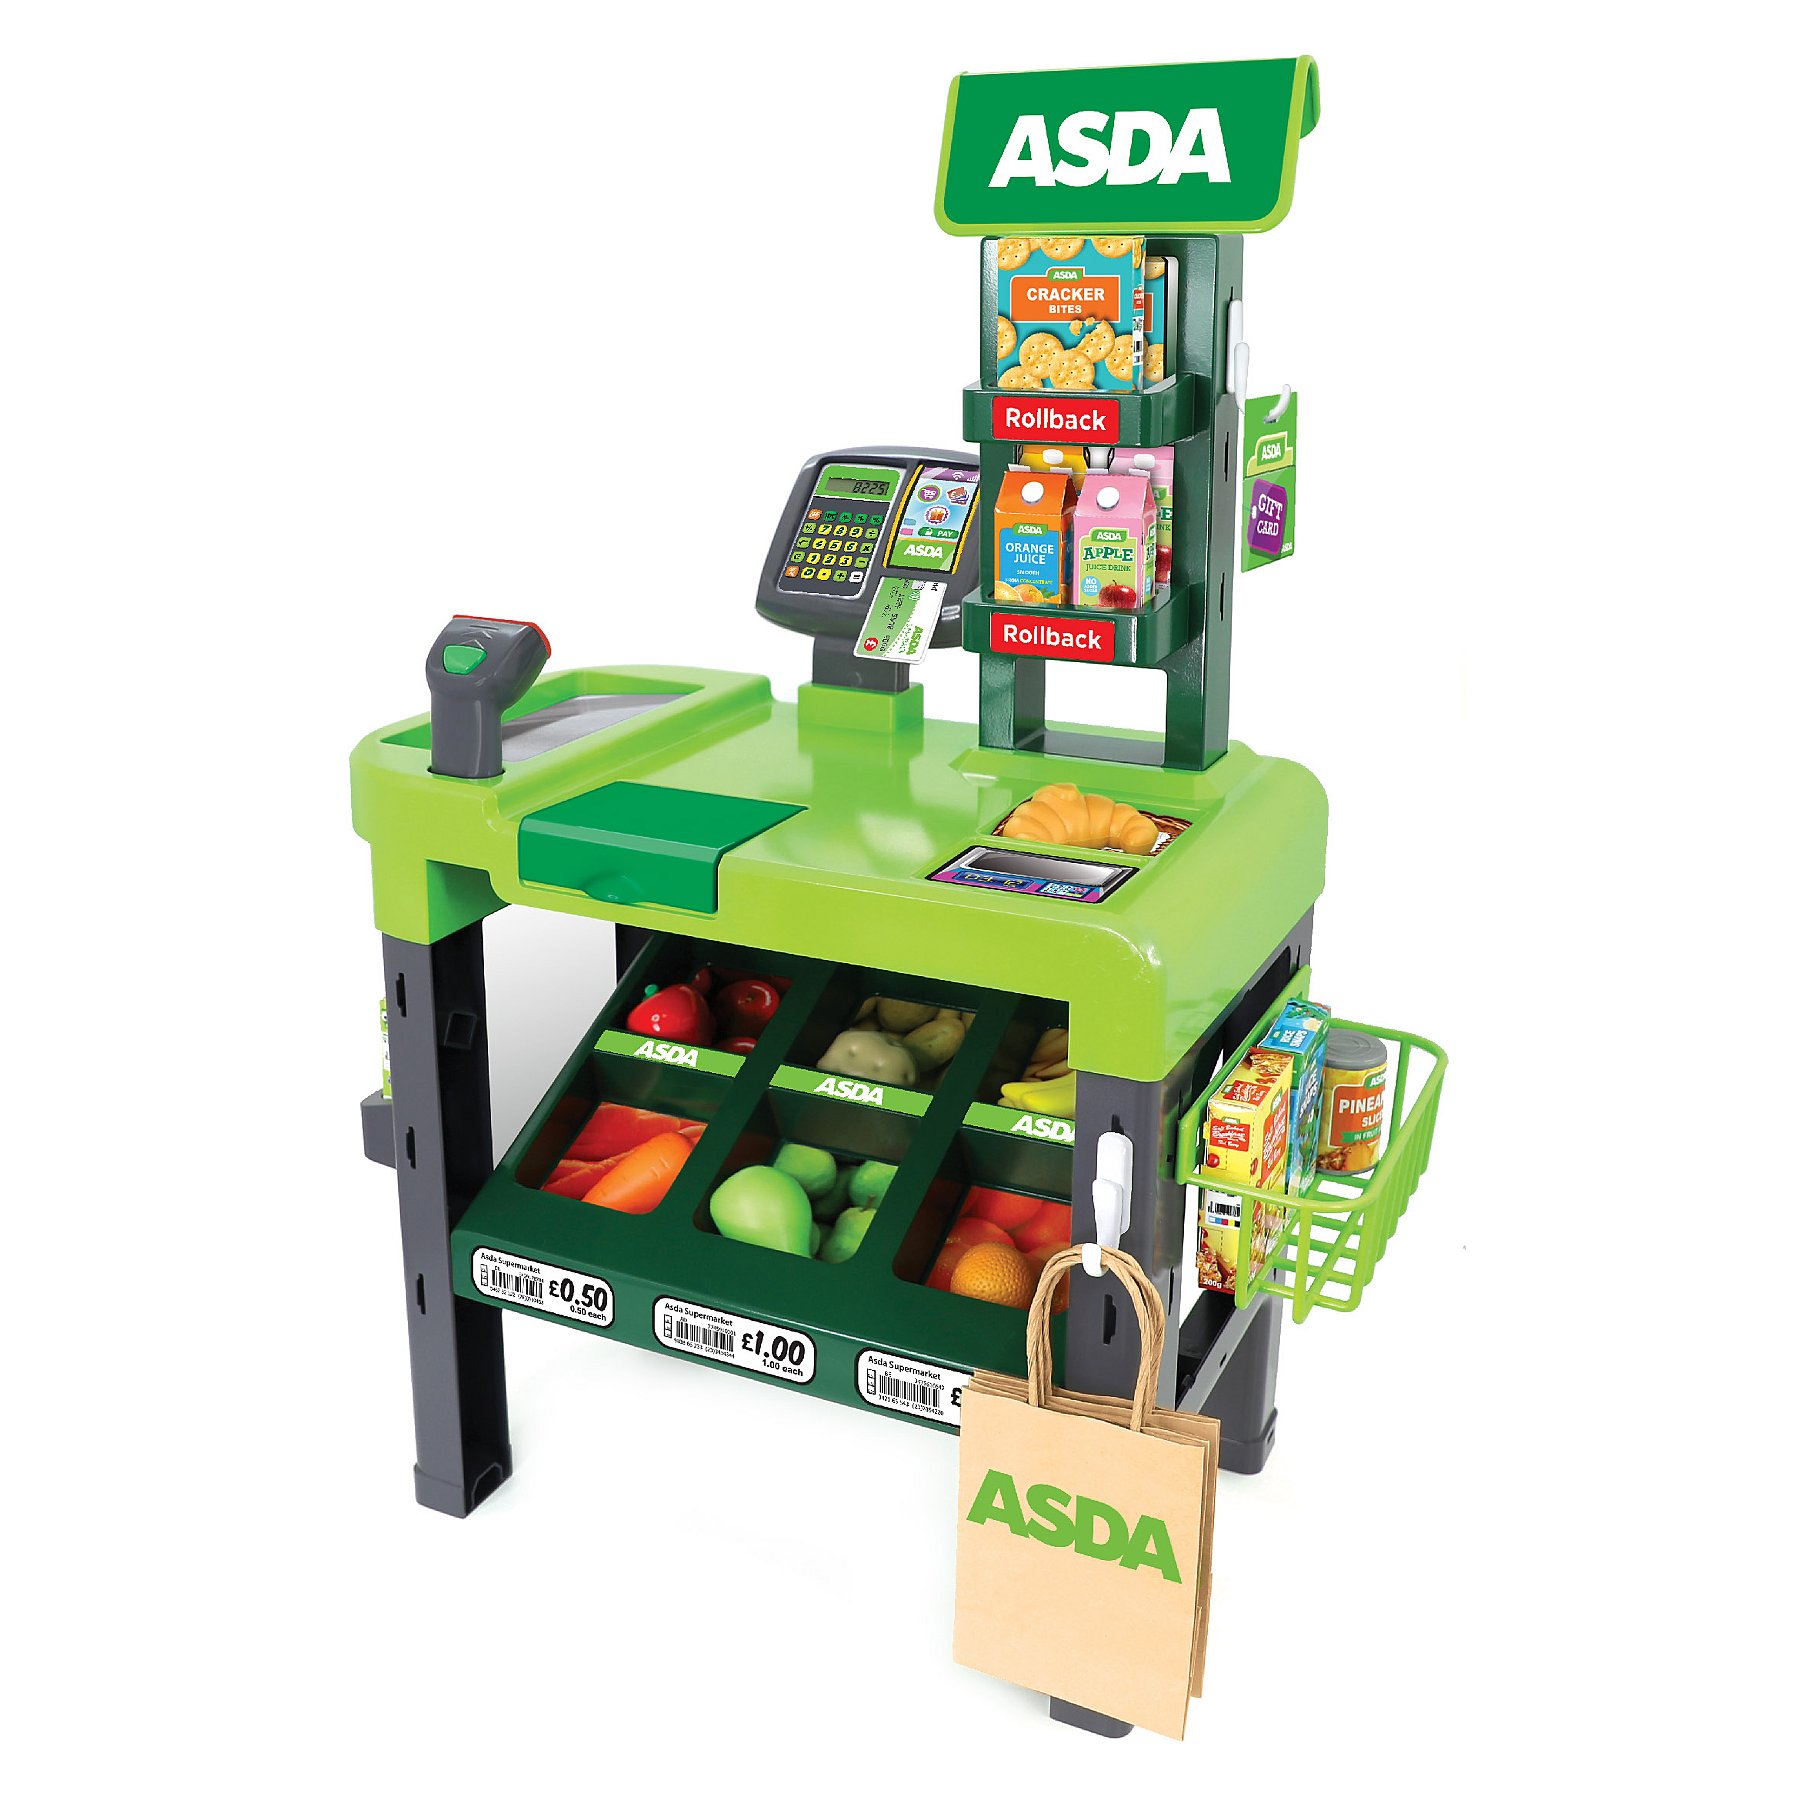 ASDA Toy Checkout Kids Roleplay Cash Register Pretend Play Supermarket Fun Gift 